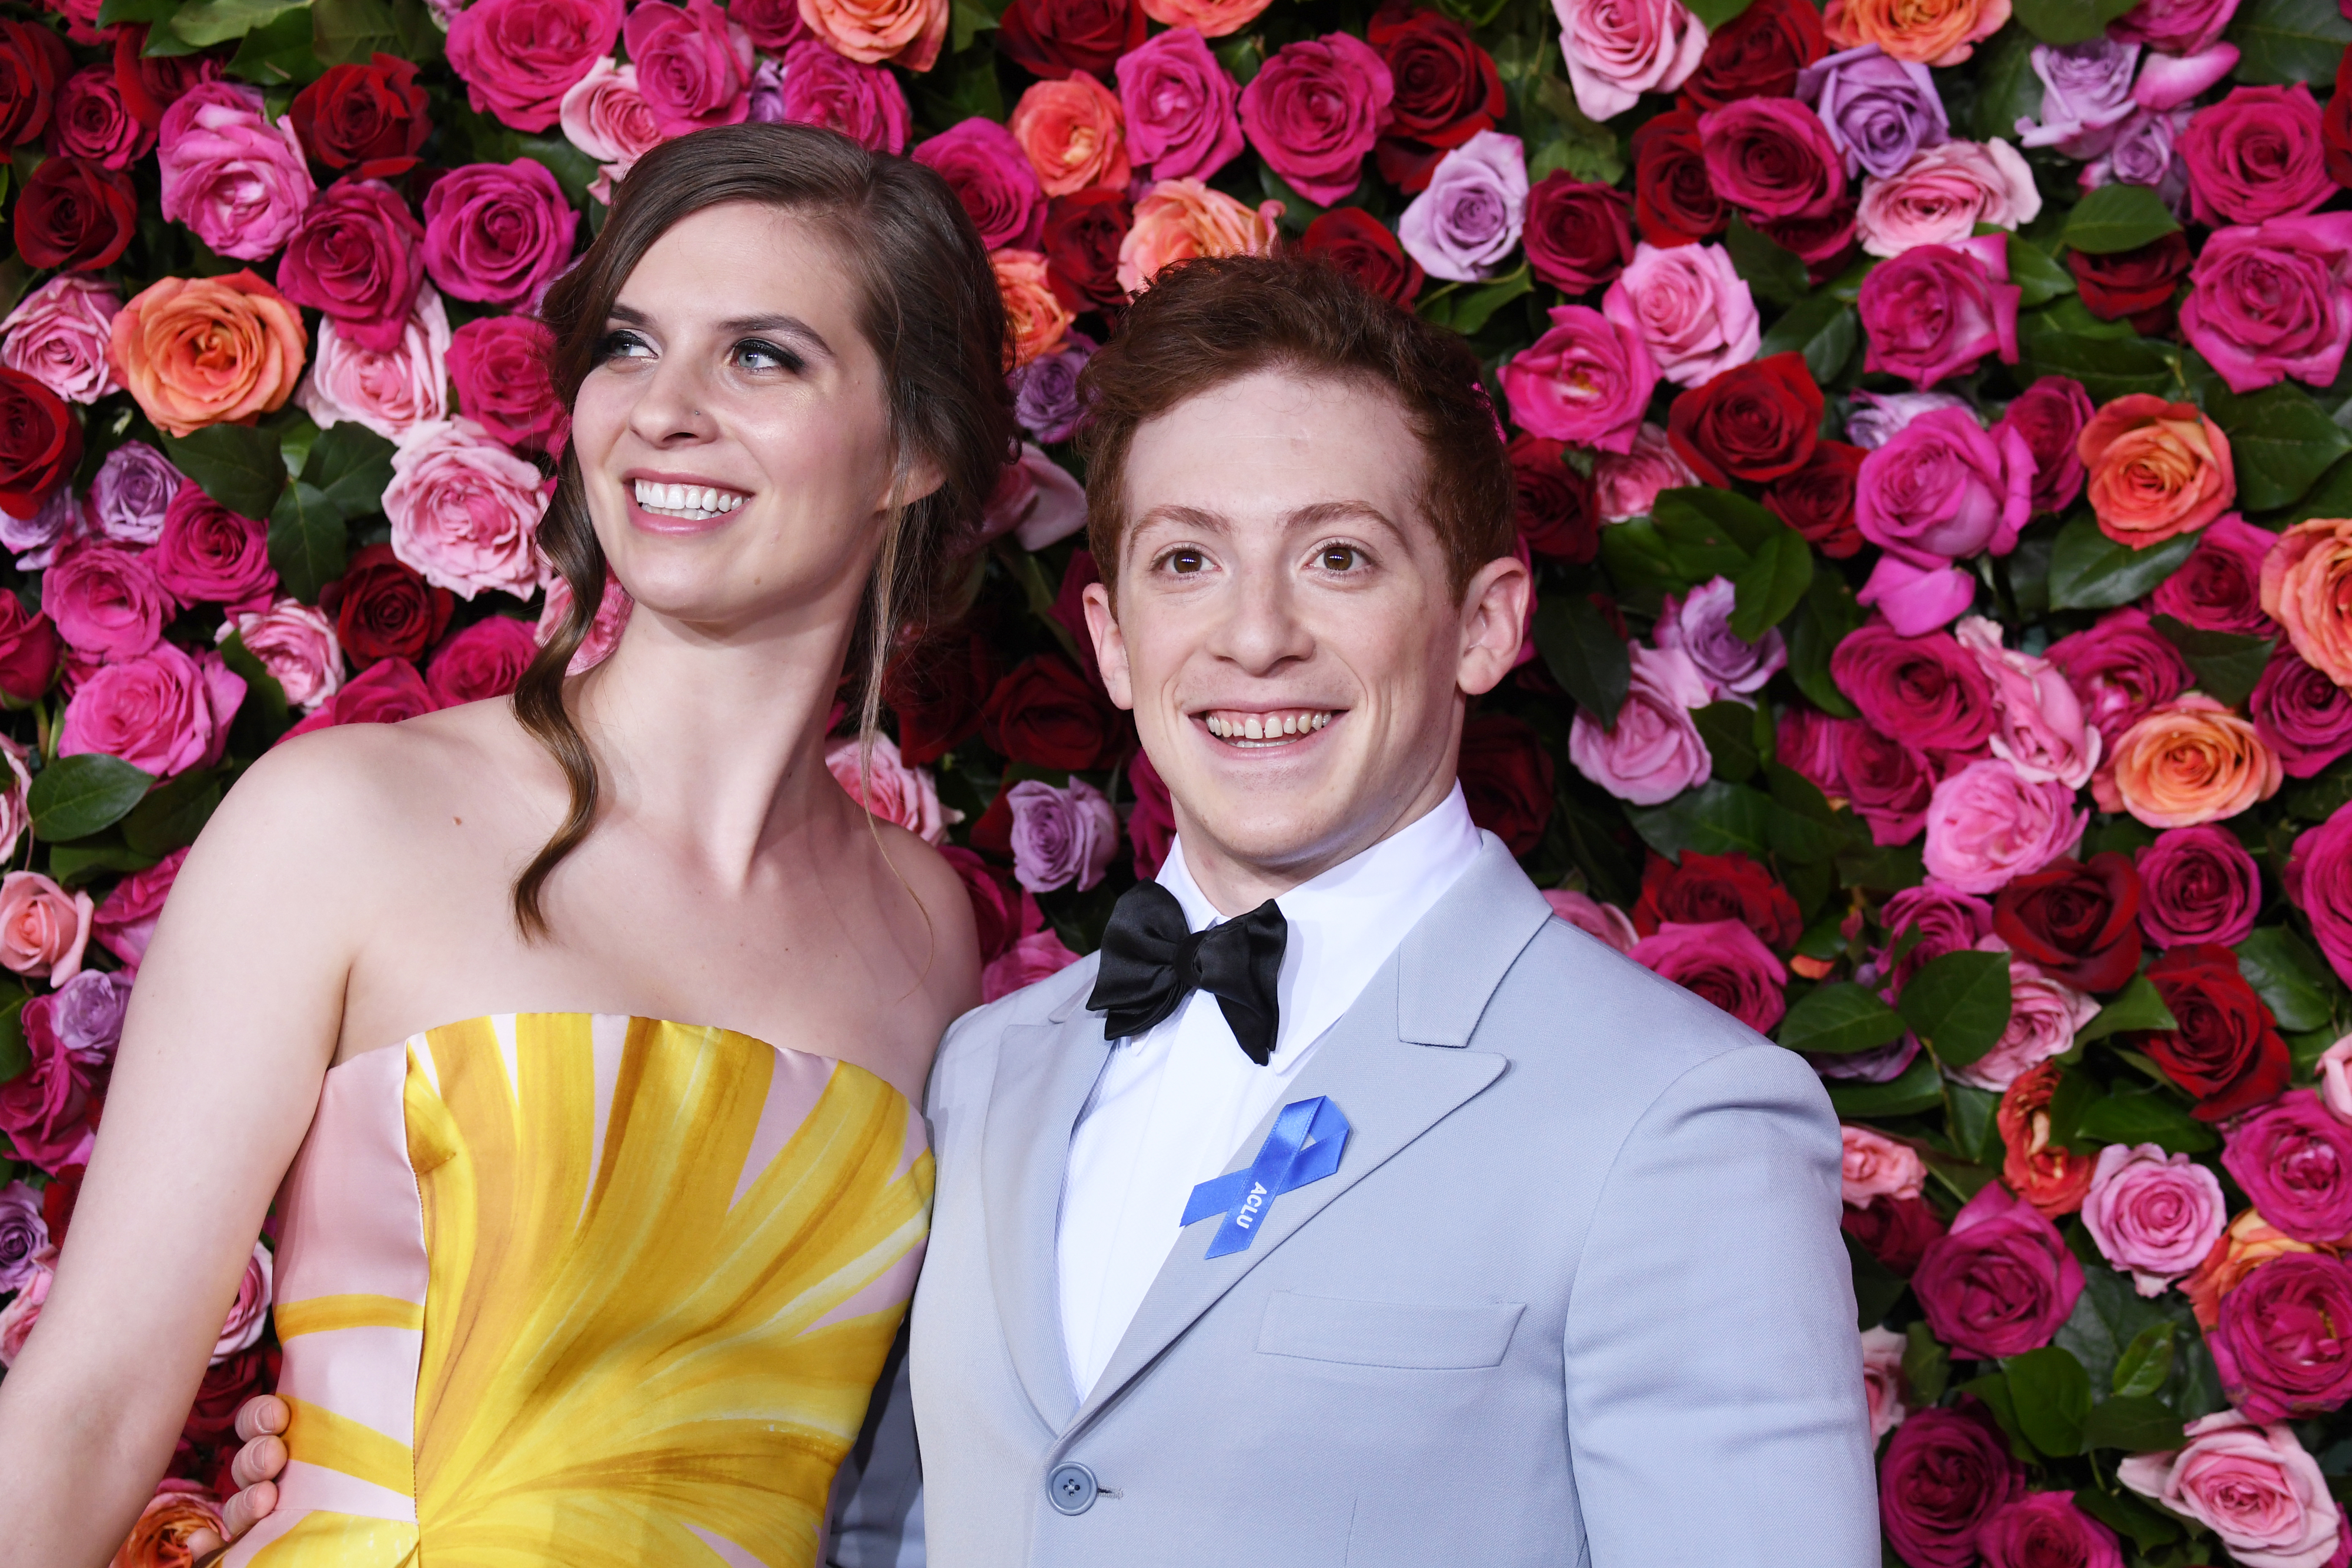 Close-up of Ethan and Lilly in front of a floral background at a media event